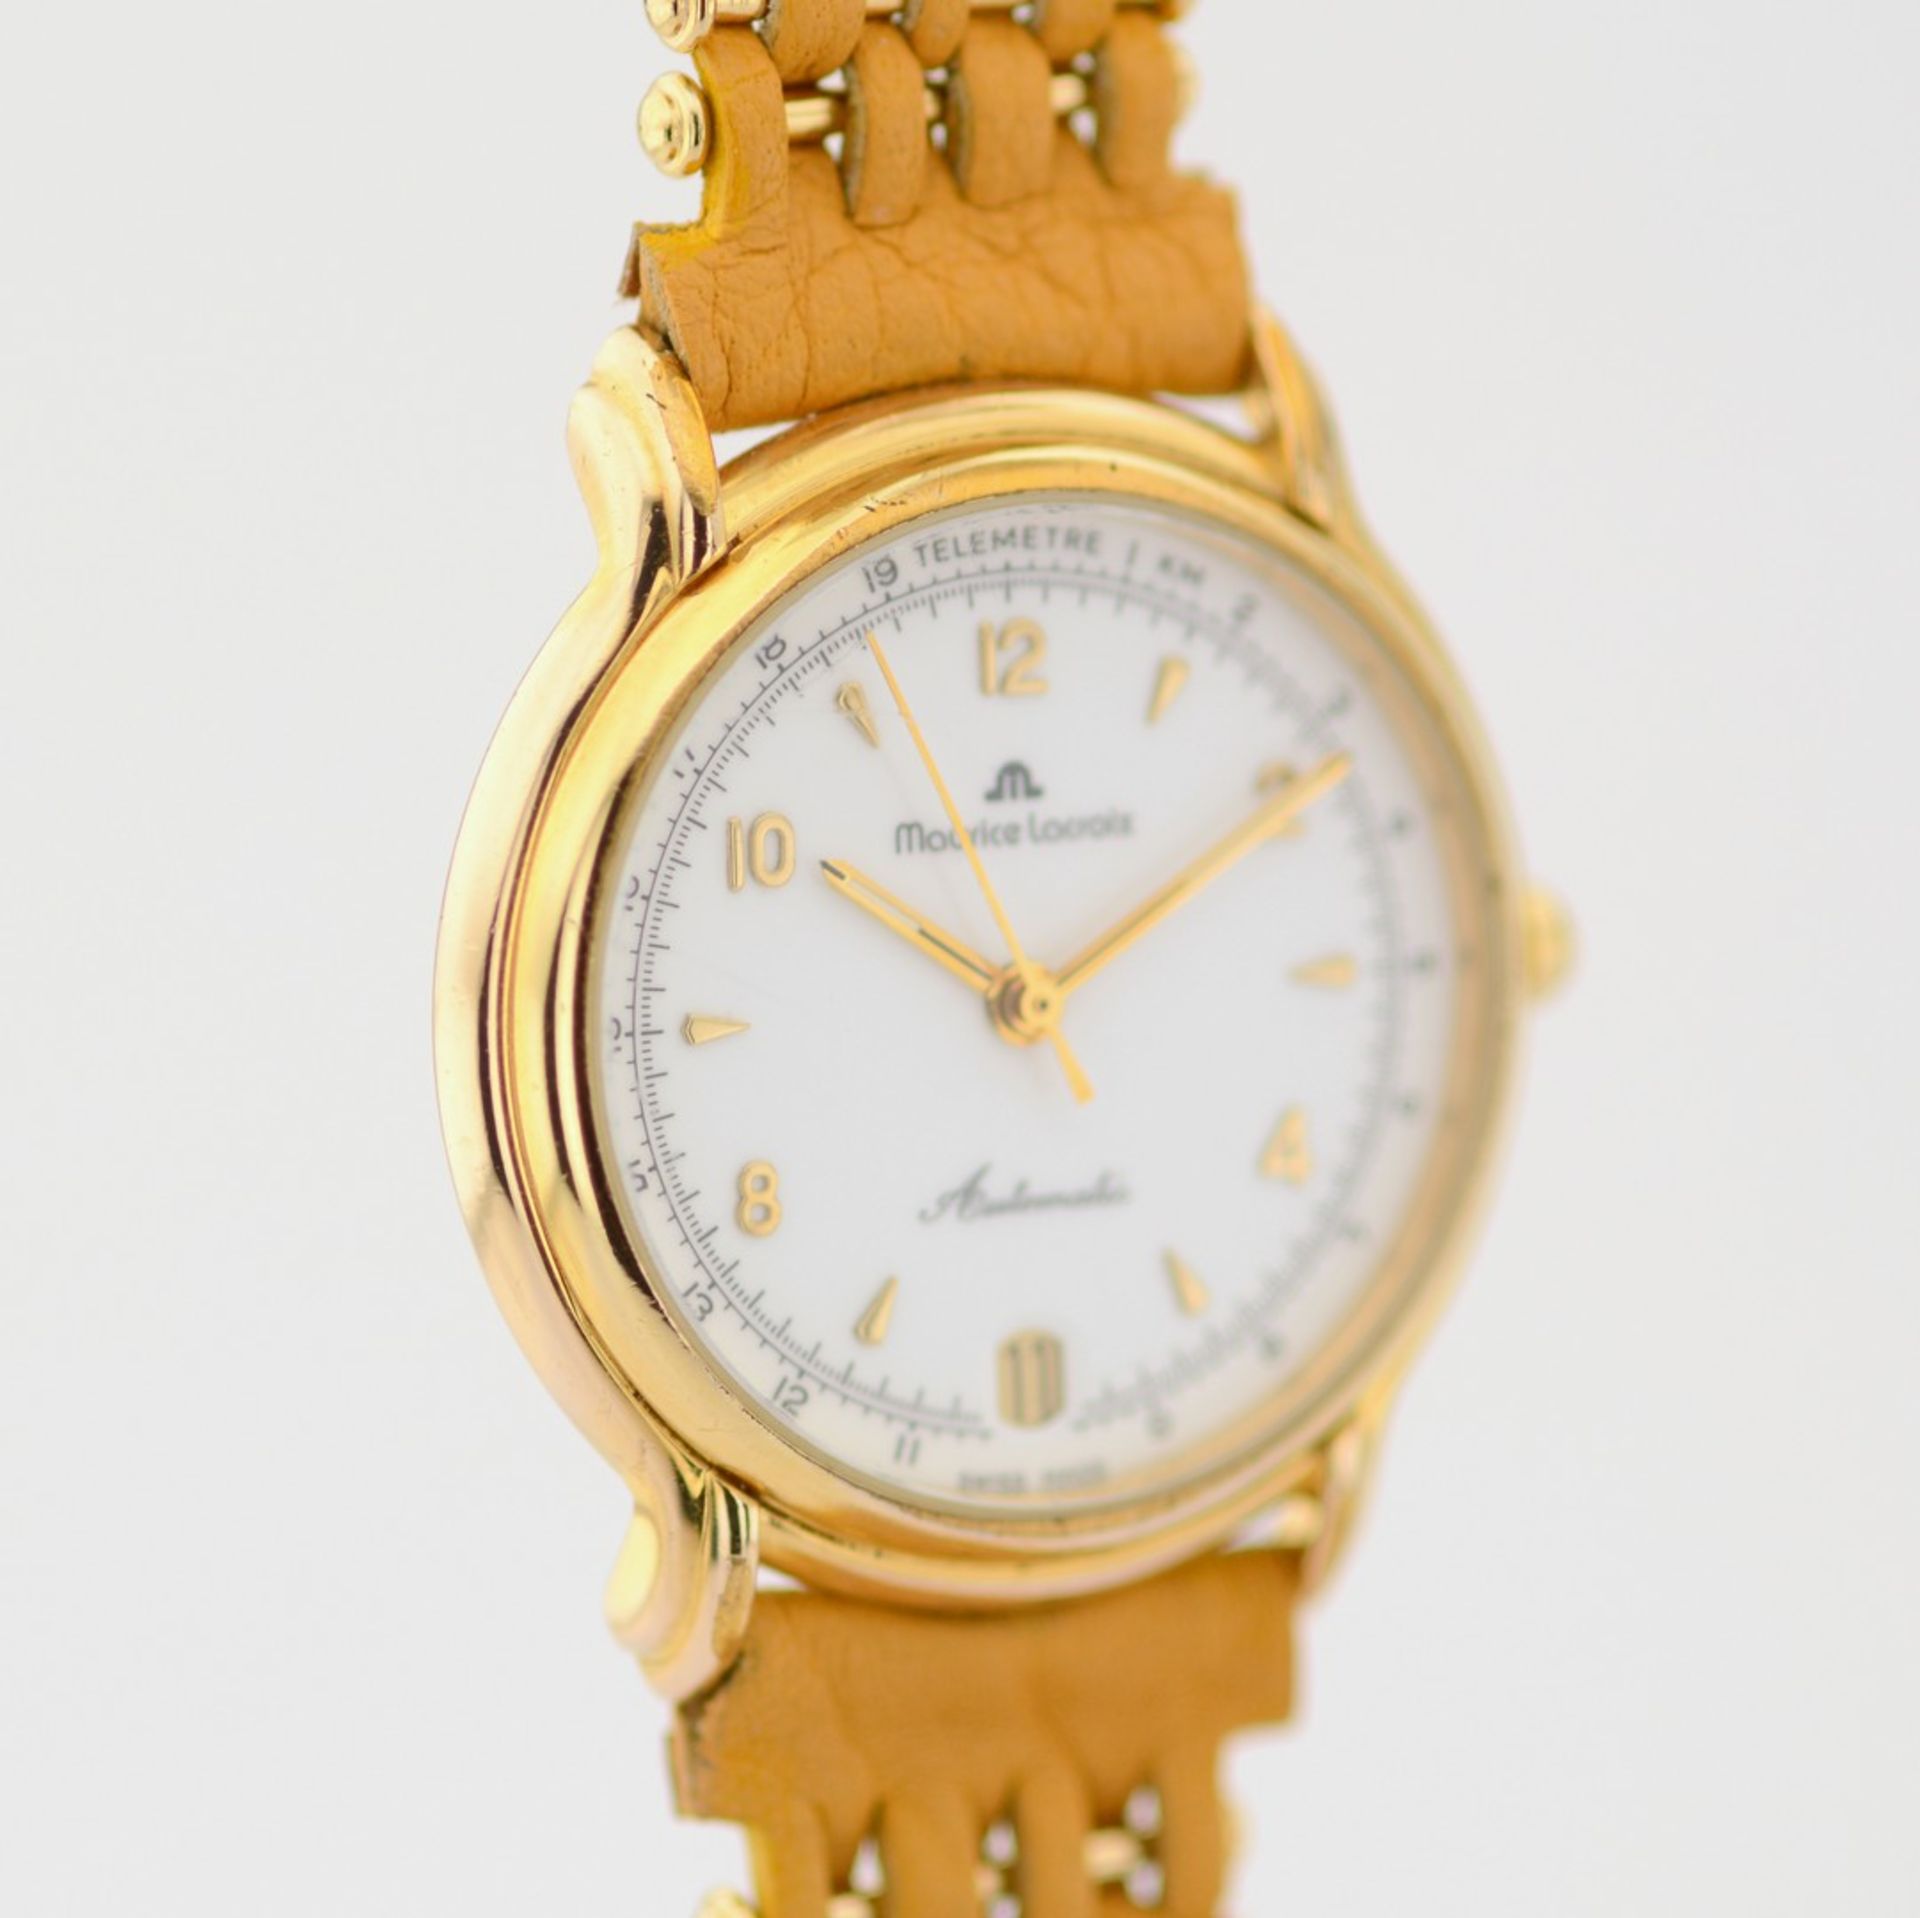 Maurice Lacroix / Automatic - Date - Unisex Steel Wristwatch - Image 5 of 6